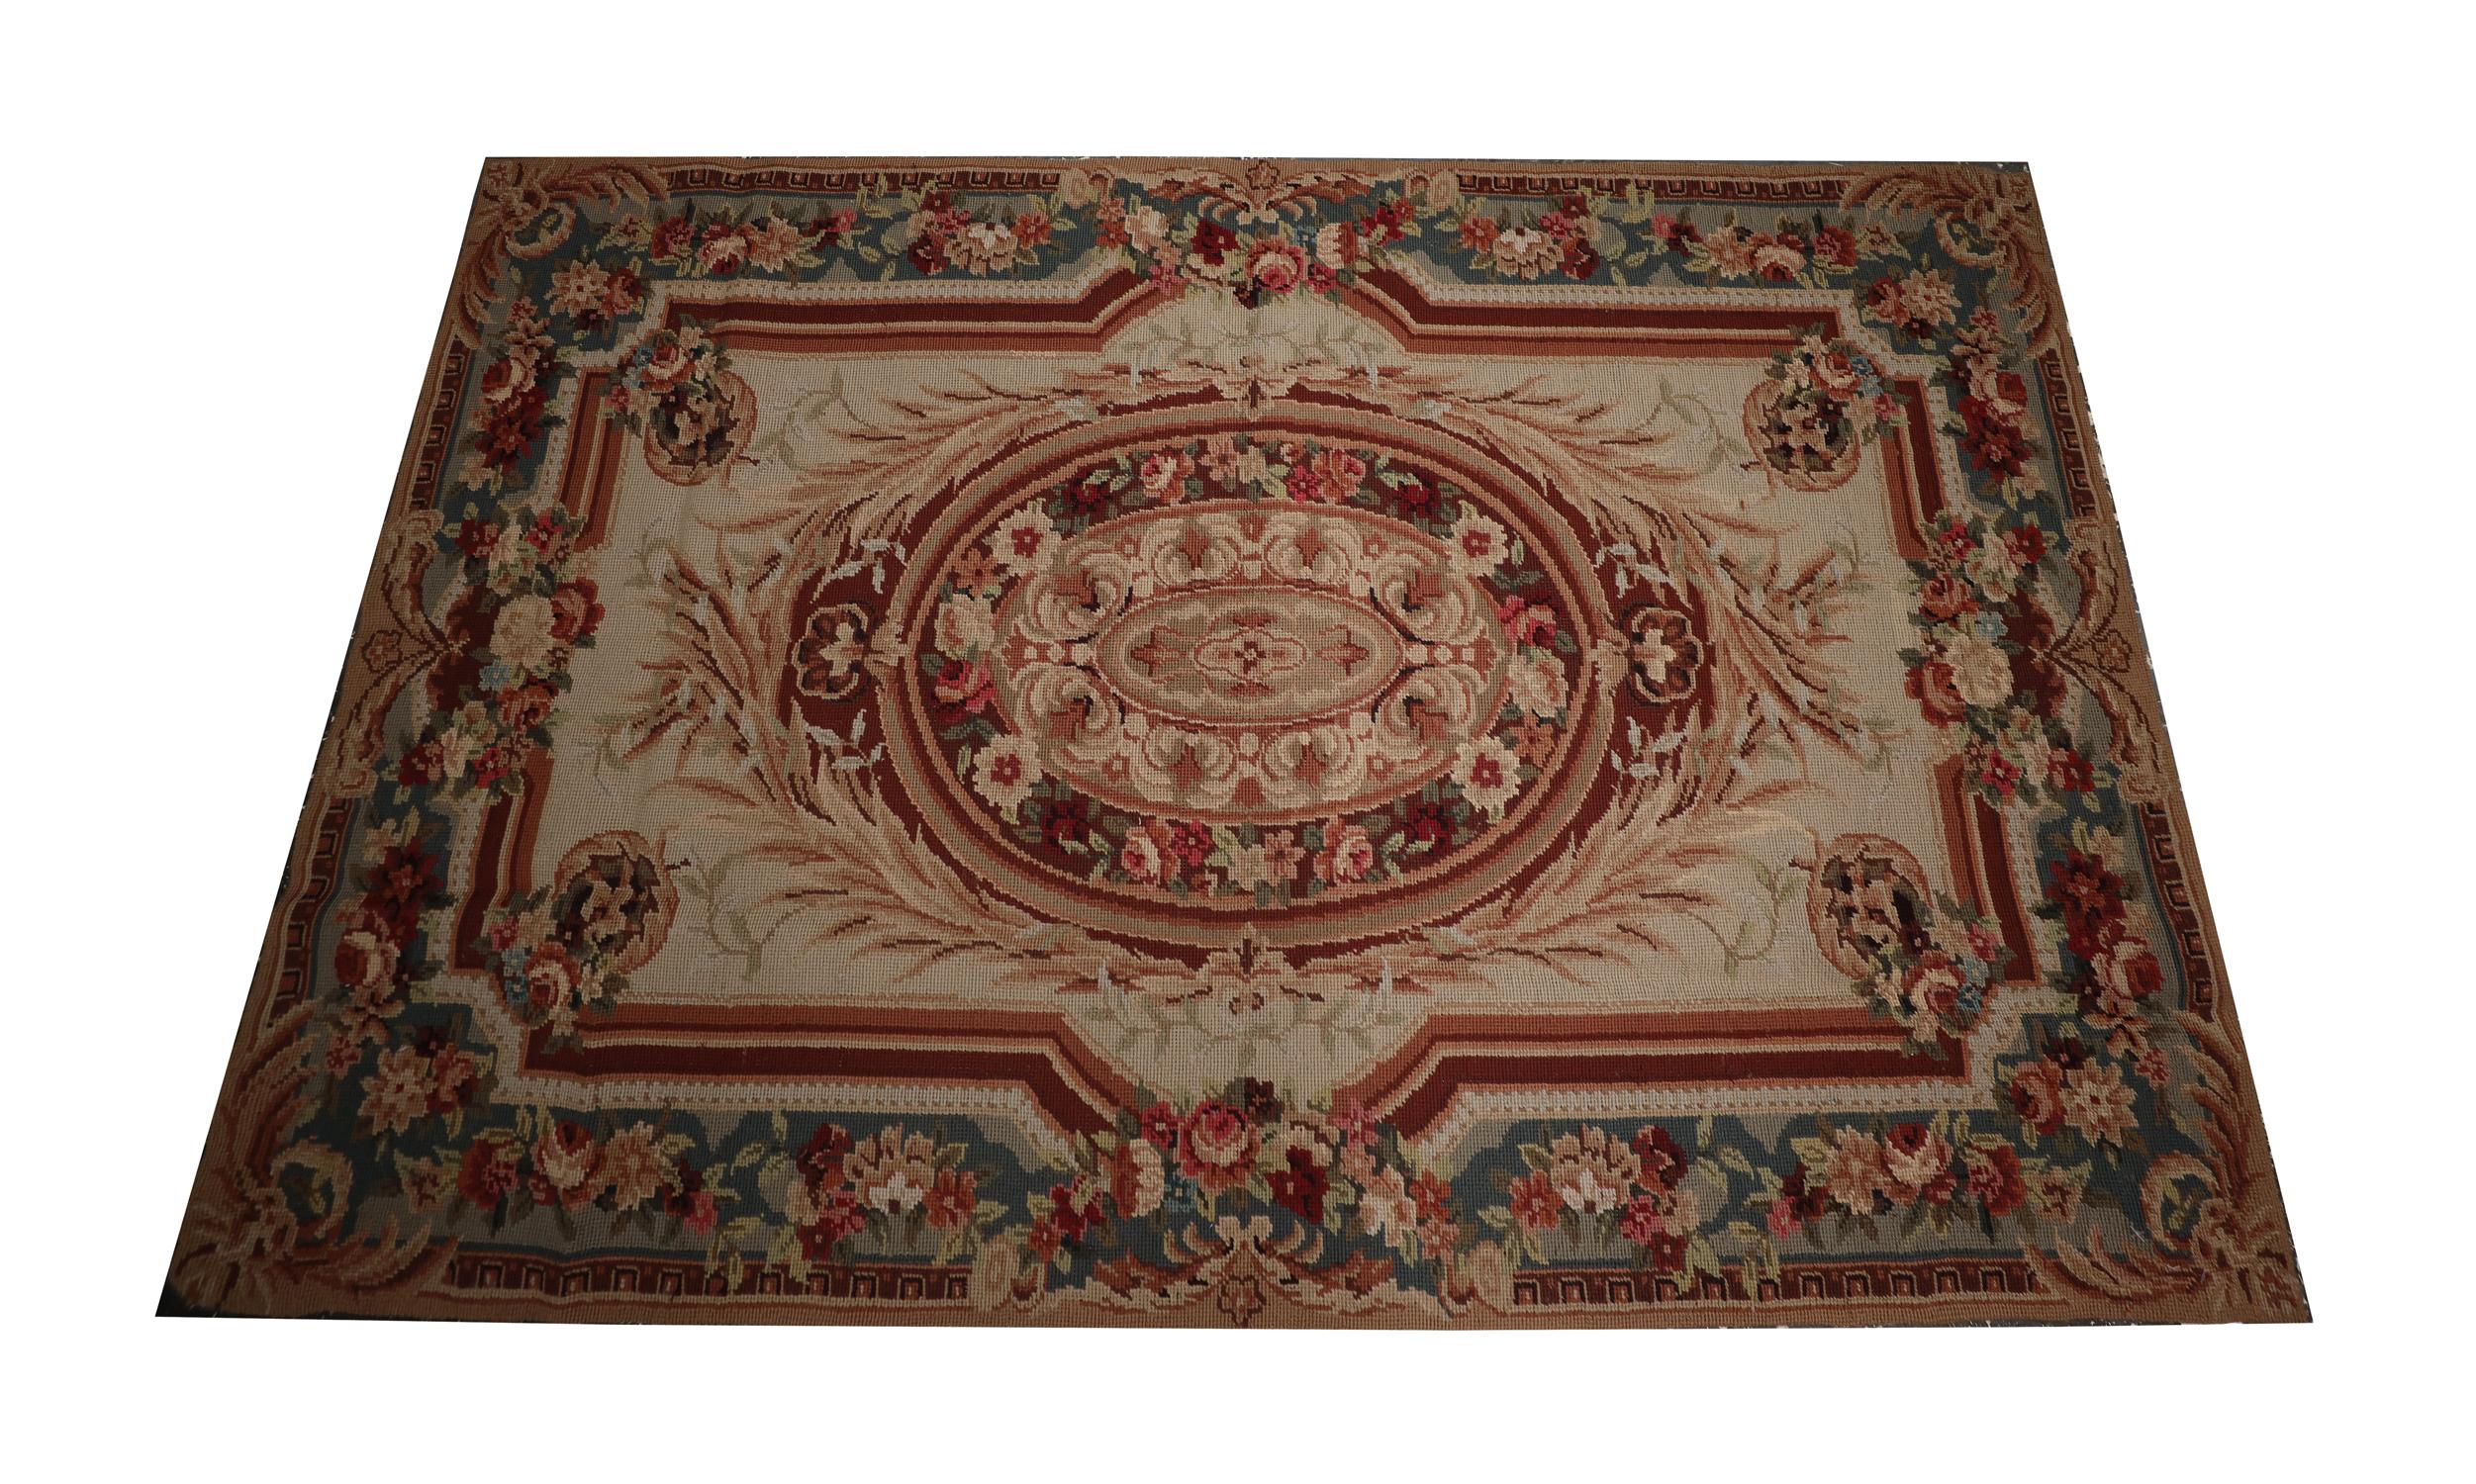 This highly decorative needlepoint rug was woven by hand in the early 21st century. The design has been intricately woven with sophistication. Featuring a bold central medallion that has been decorated with beautiful flowers and scroll details. This